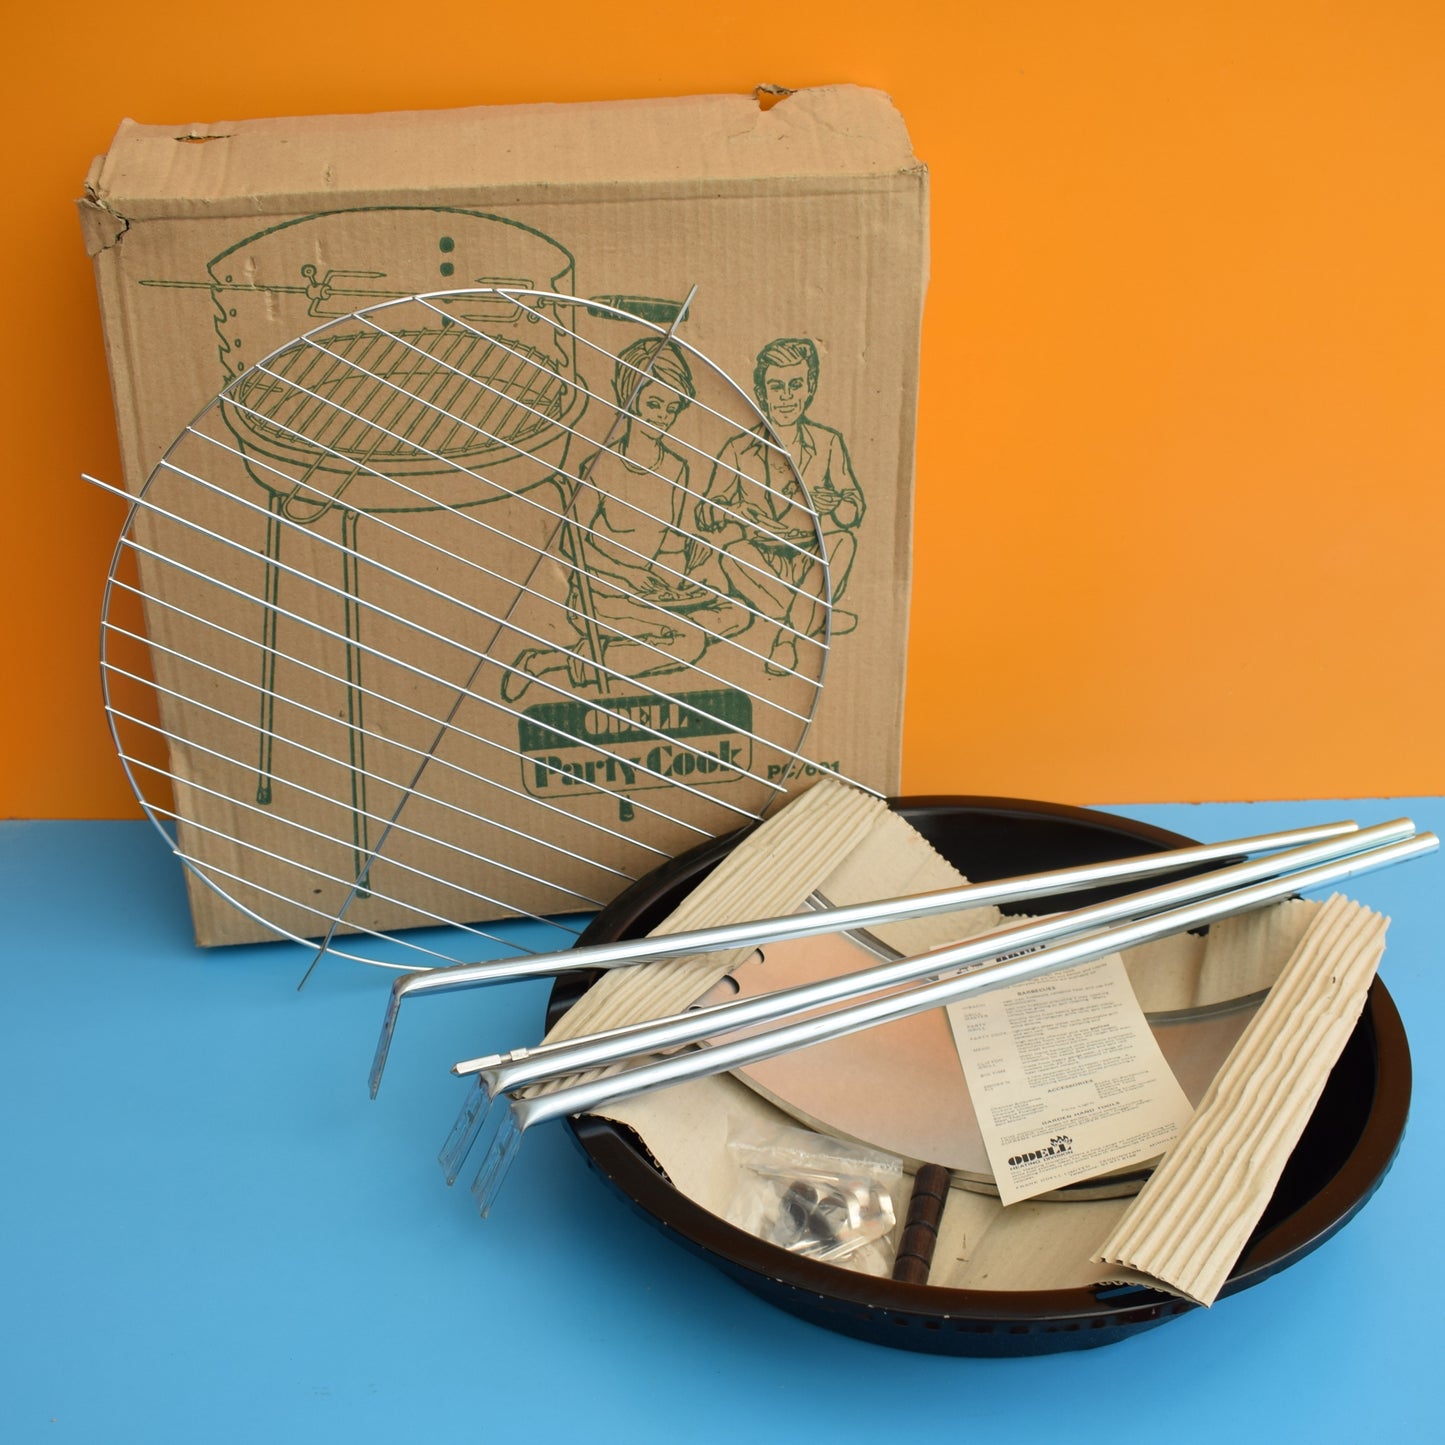 Vintage 1970s Odell Party Cook BBQ - Unused / Boxed